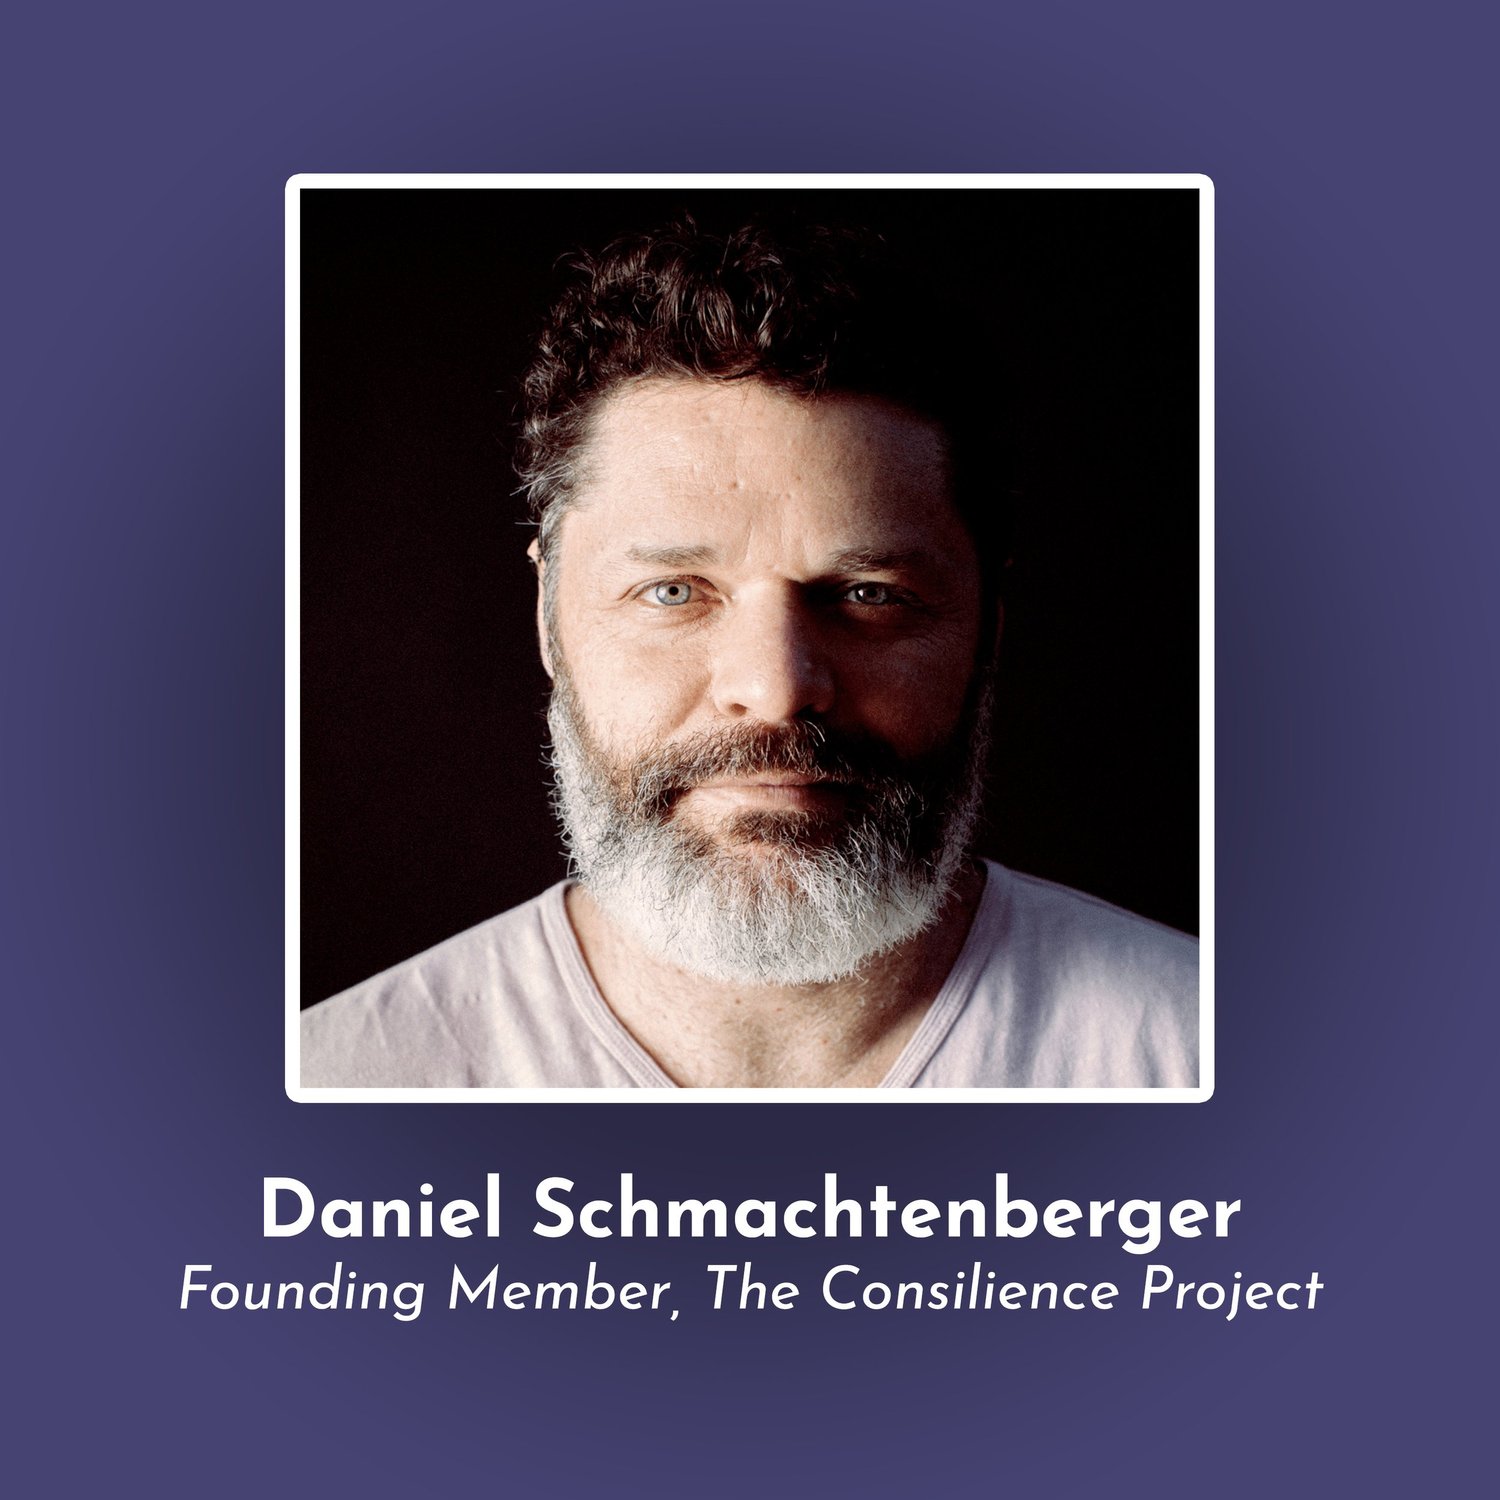 On this episode, Daniel Schmachtenberger returns to discuss a surprisingly overlooked risk to our global systems and planetary stability: artificial i